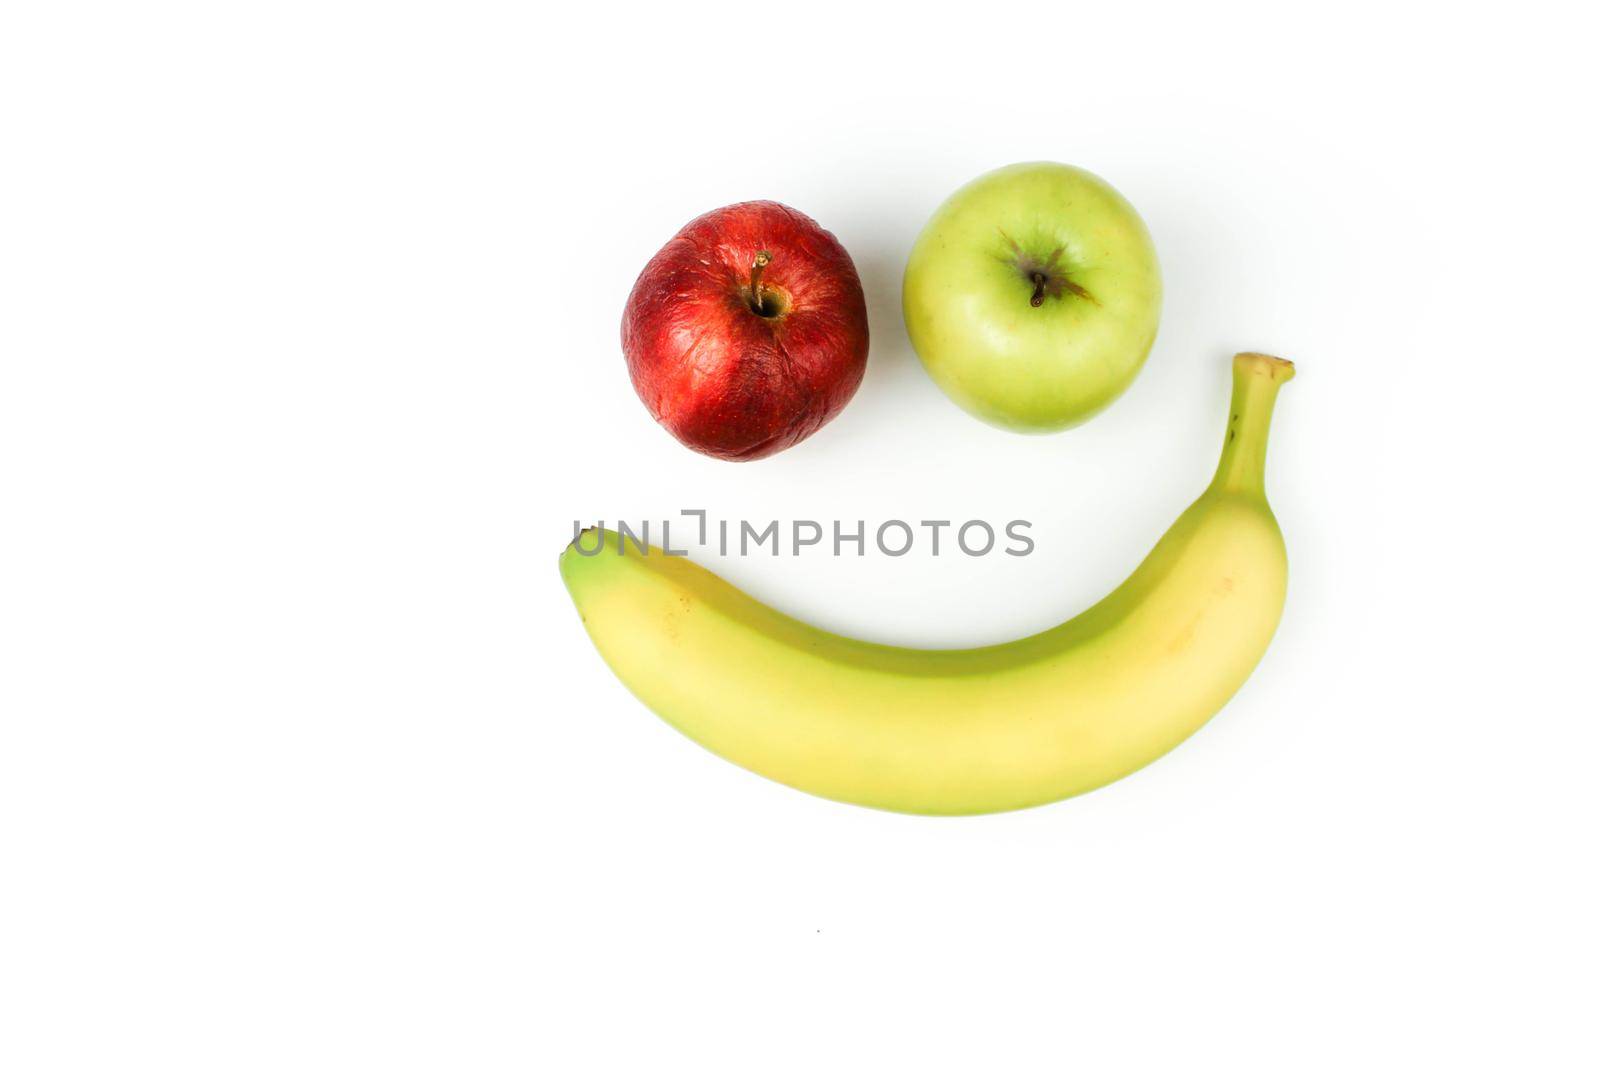 banana and apples smiley on white fashion background with space for text.